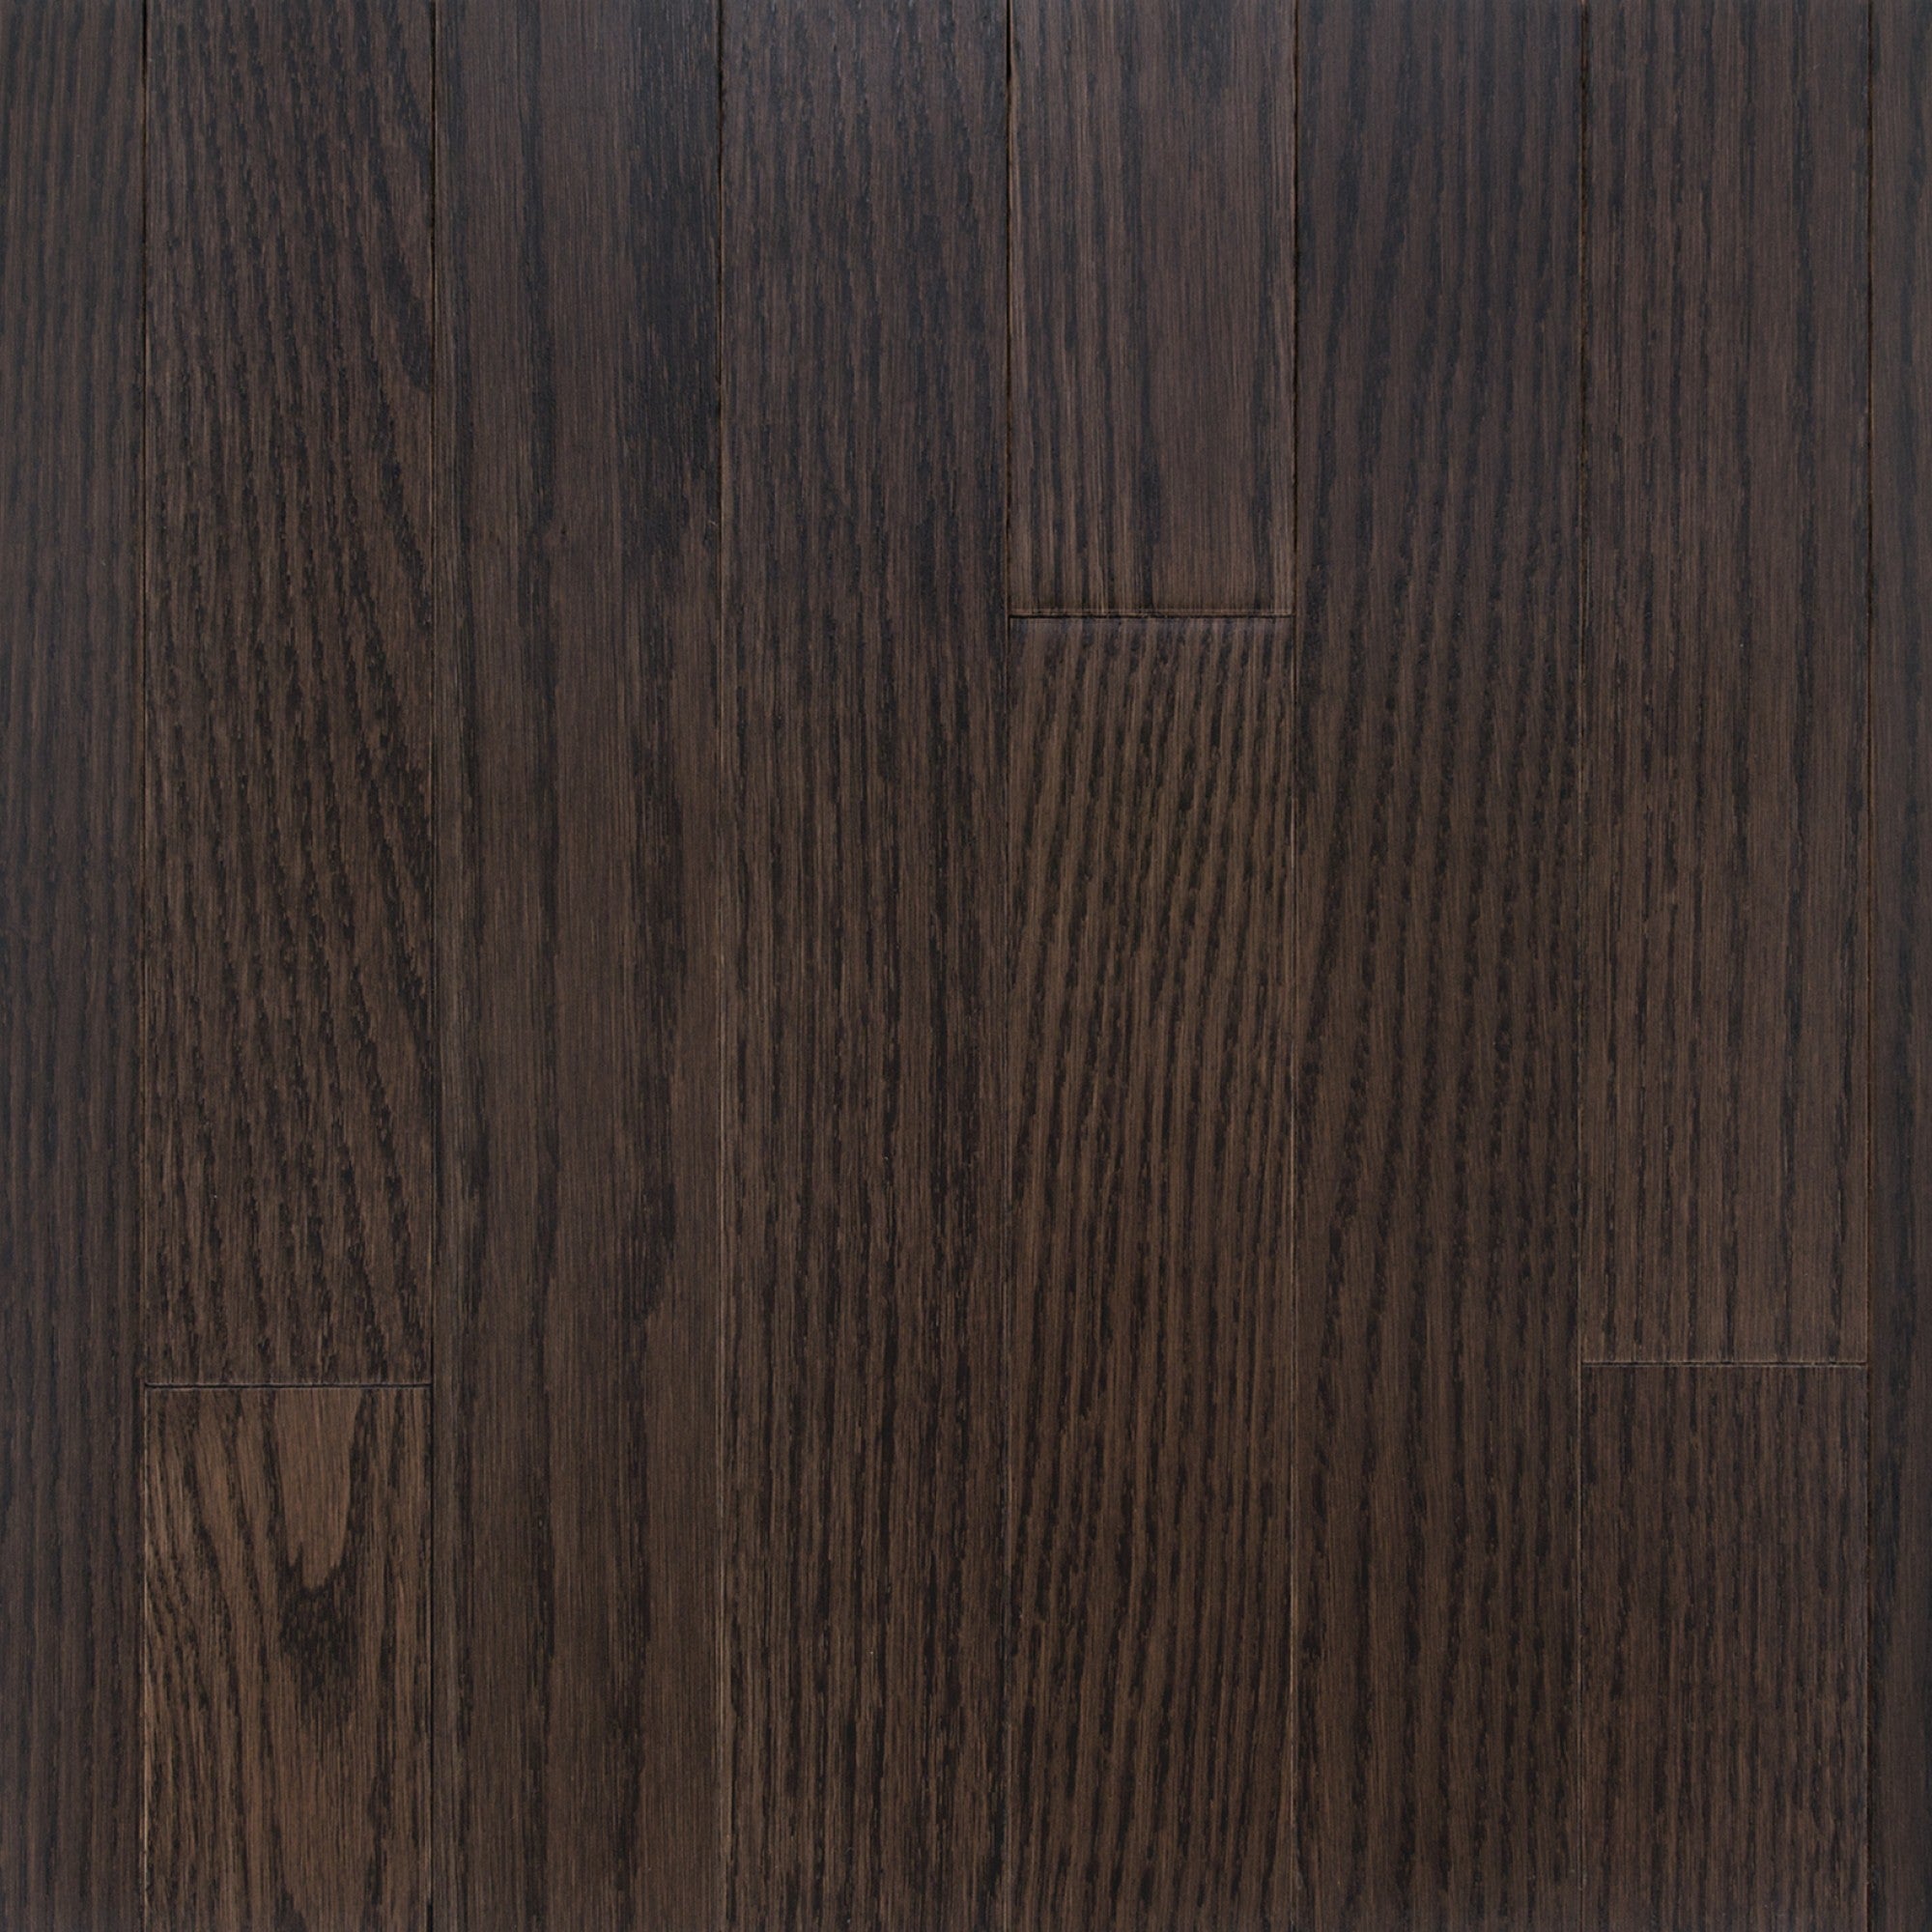 Vintage Northern Solid Sawn Red Oak Berkshire Smooth 5" x 3/4" Pearl Low Sheen Character Grade